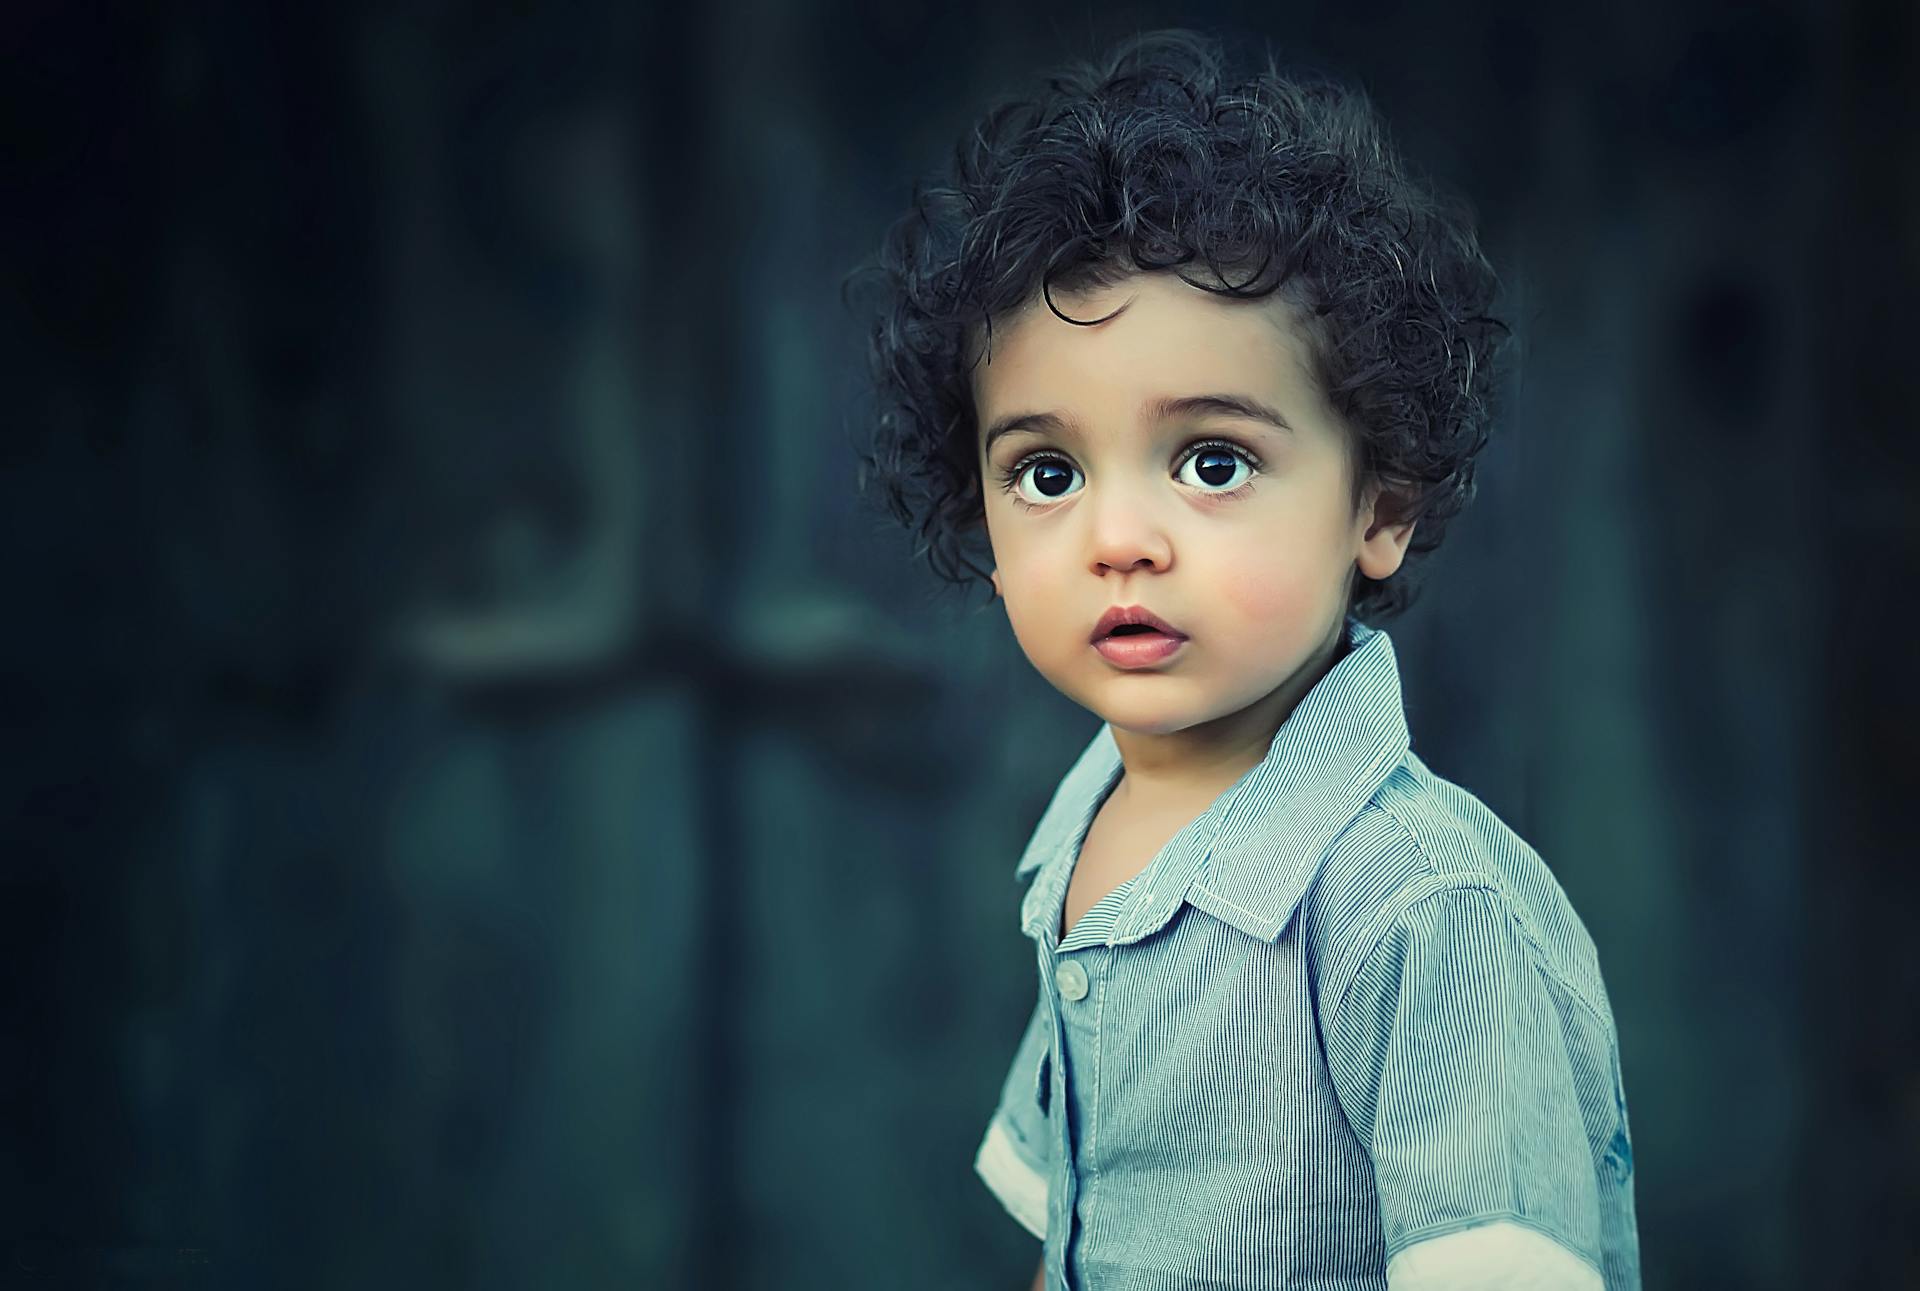 Little boy with curly hair | Source: Pexels